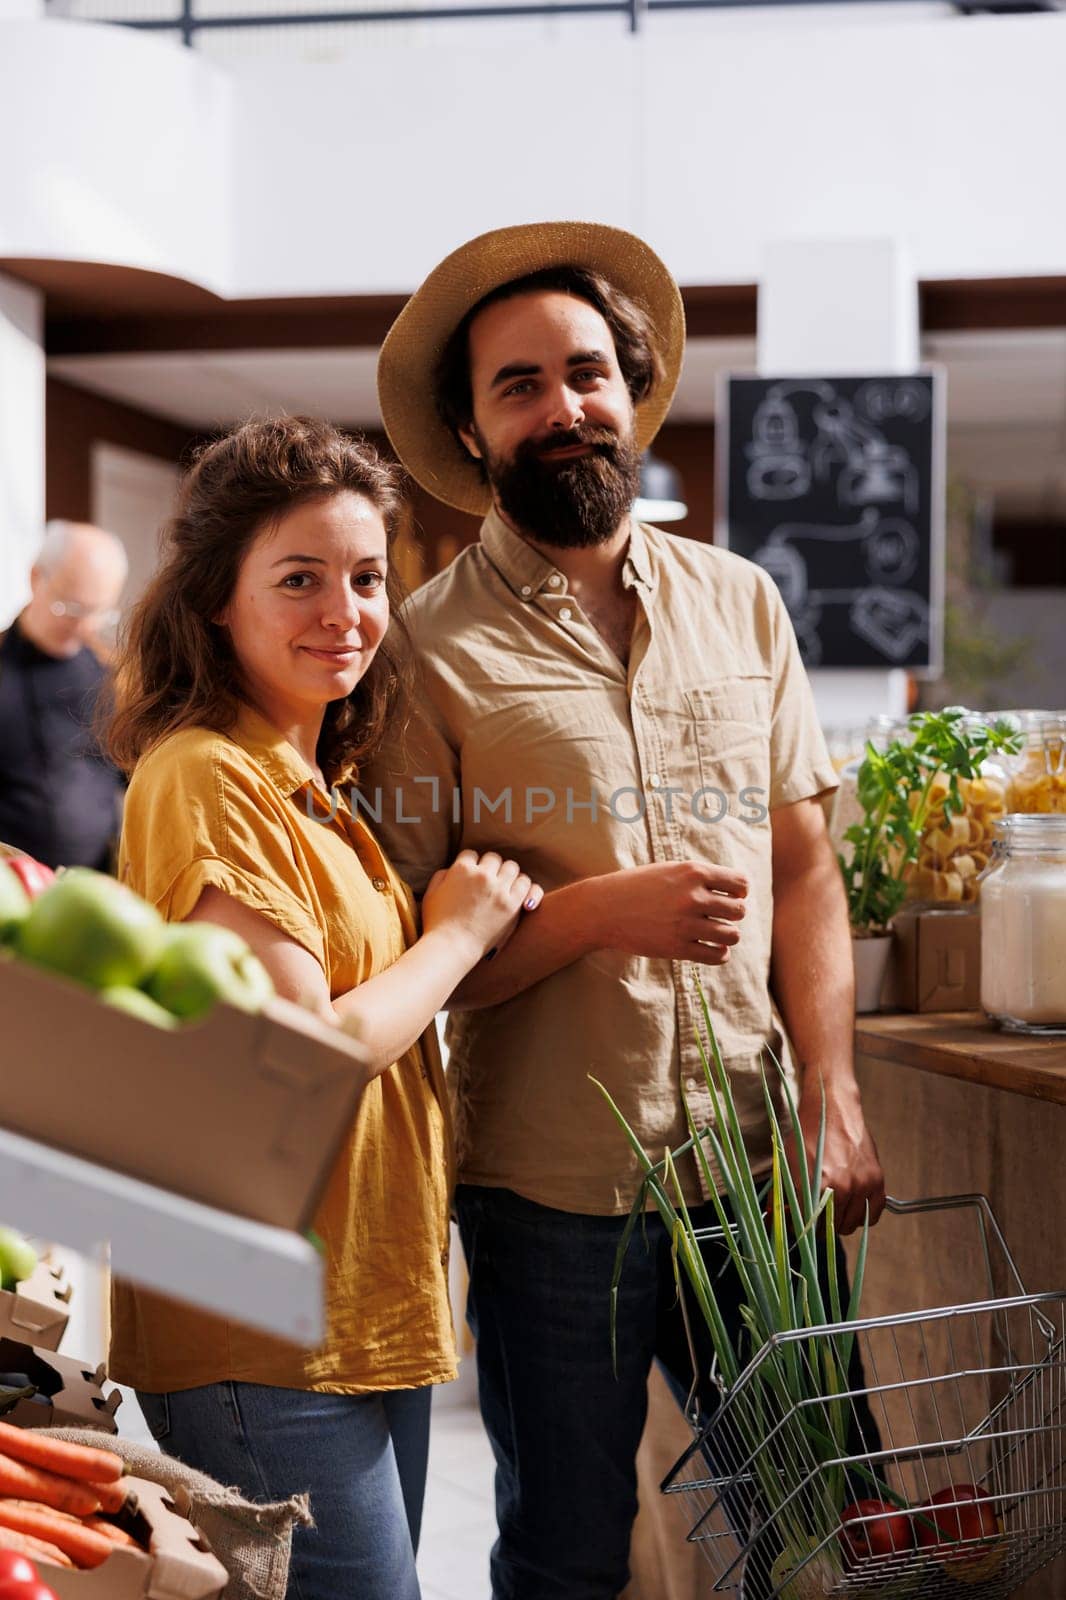 Husband and wife shopping in zero waste store, looking for healthy locally sourced bulk products. Green living couple purchasing pantry staples from local neighborhood shop